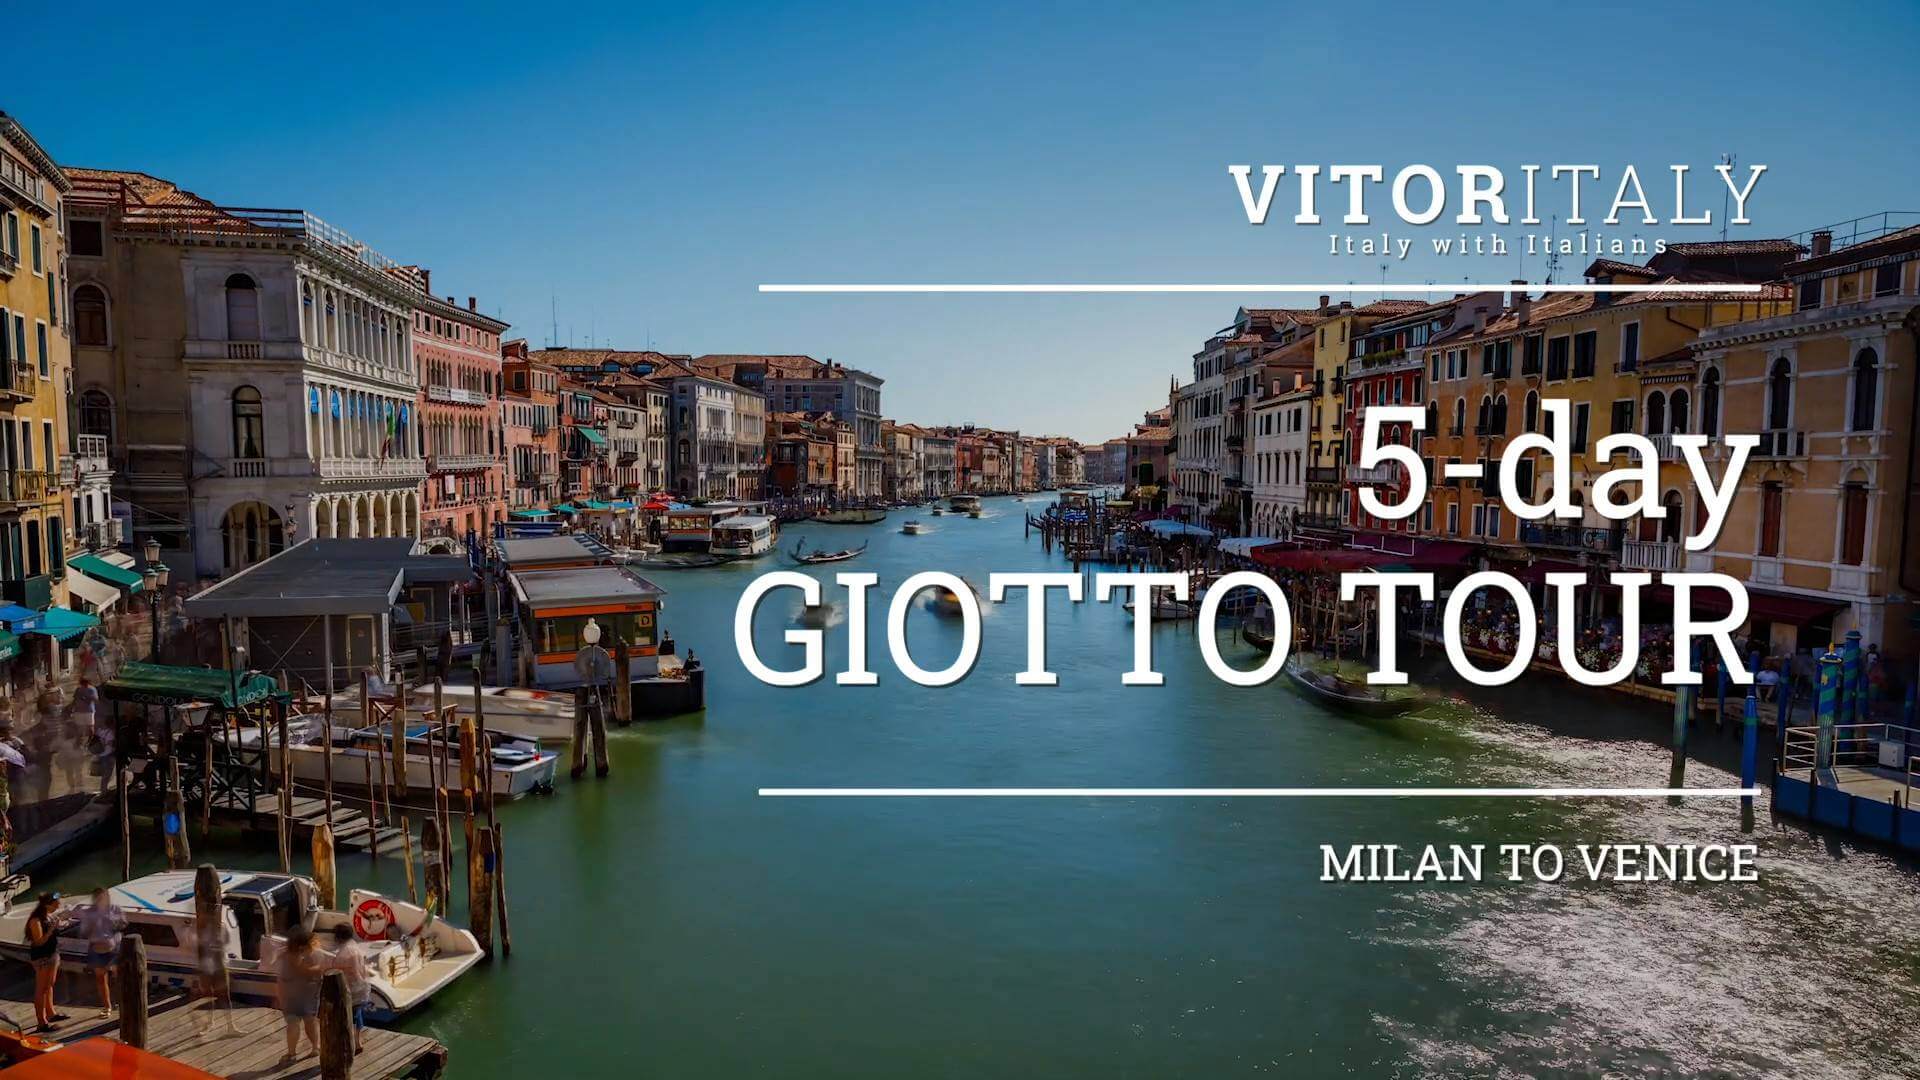 GIOTTO TOUR - Milan to Venice in 5 days